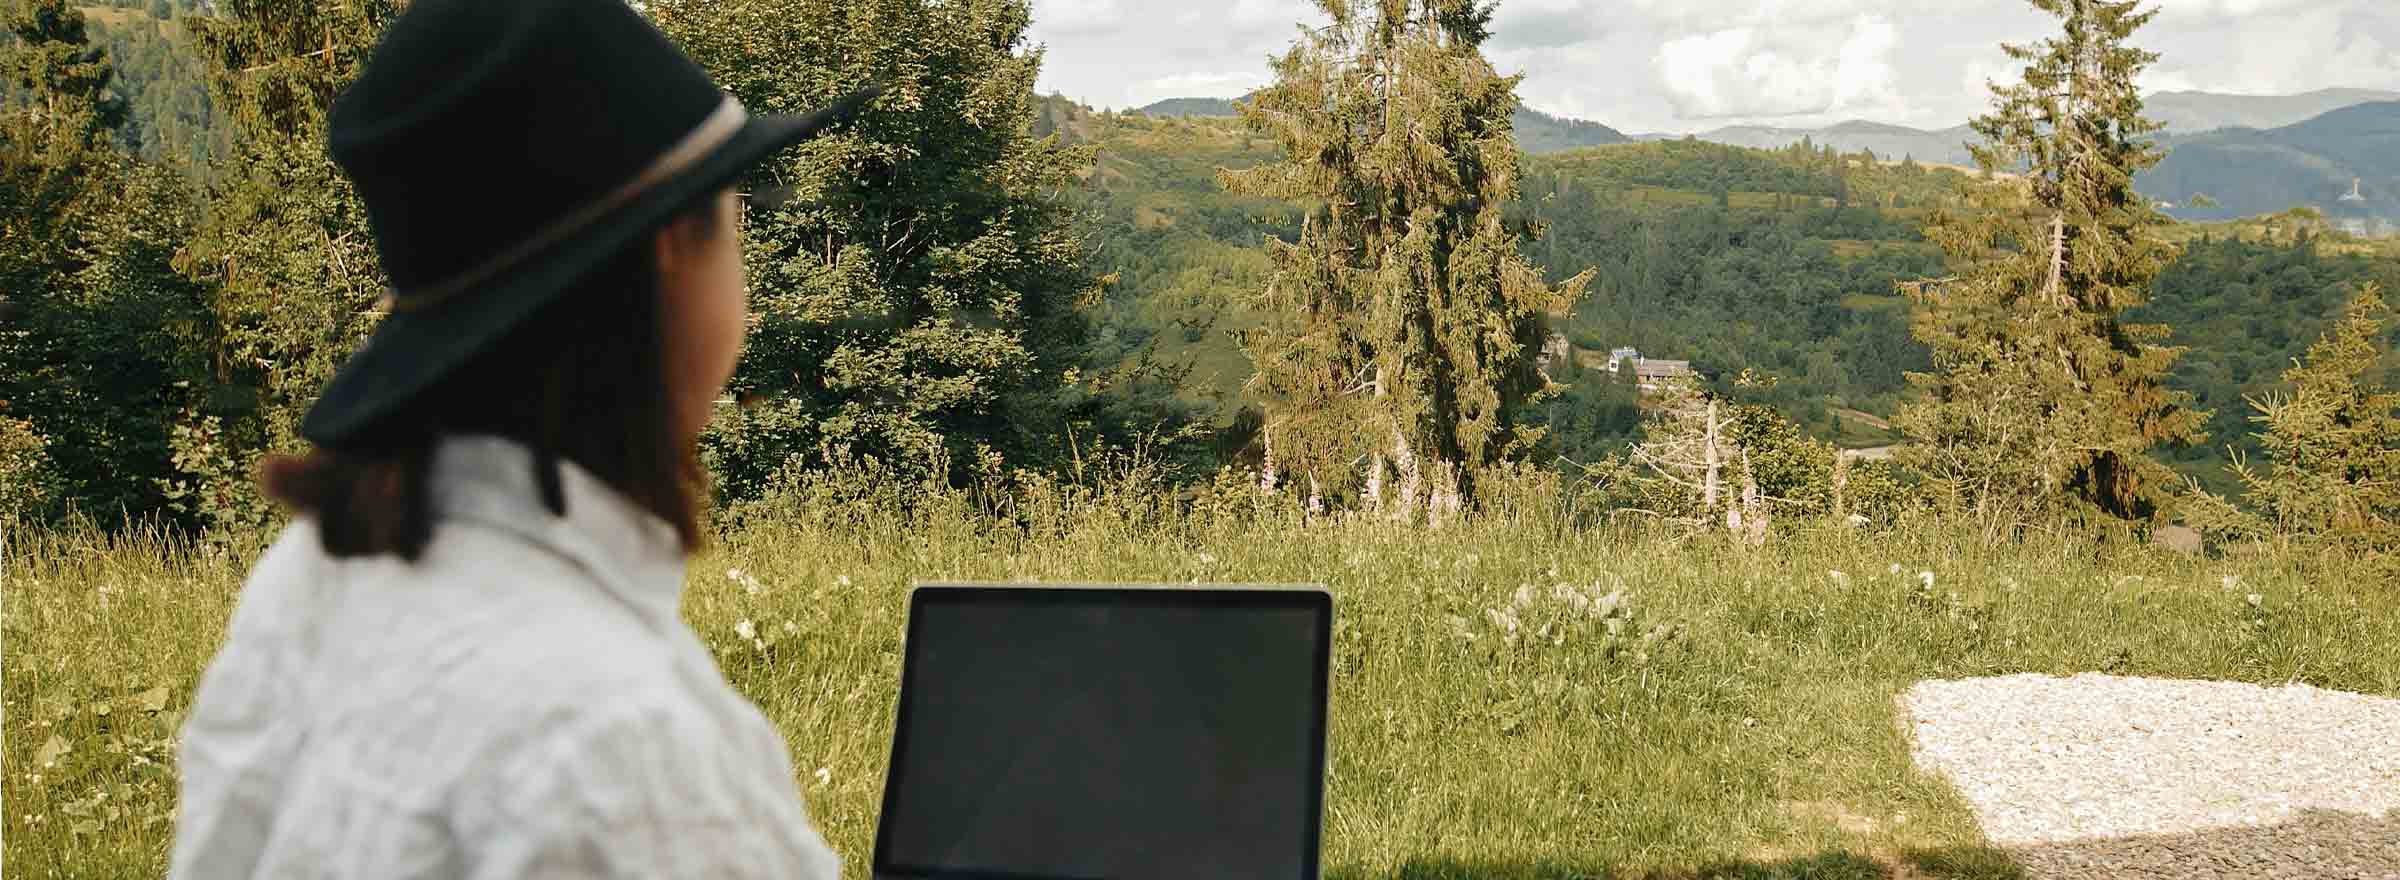 woman using a laptop outdoors in hilly country